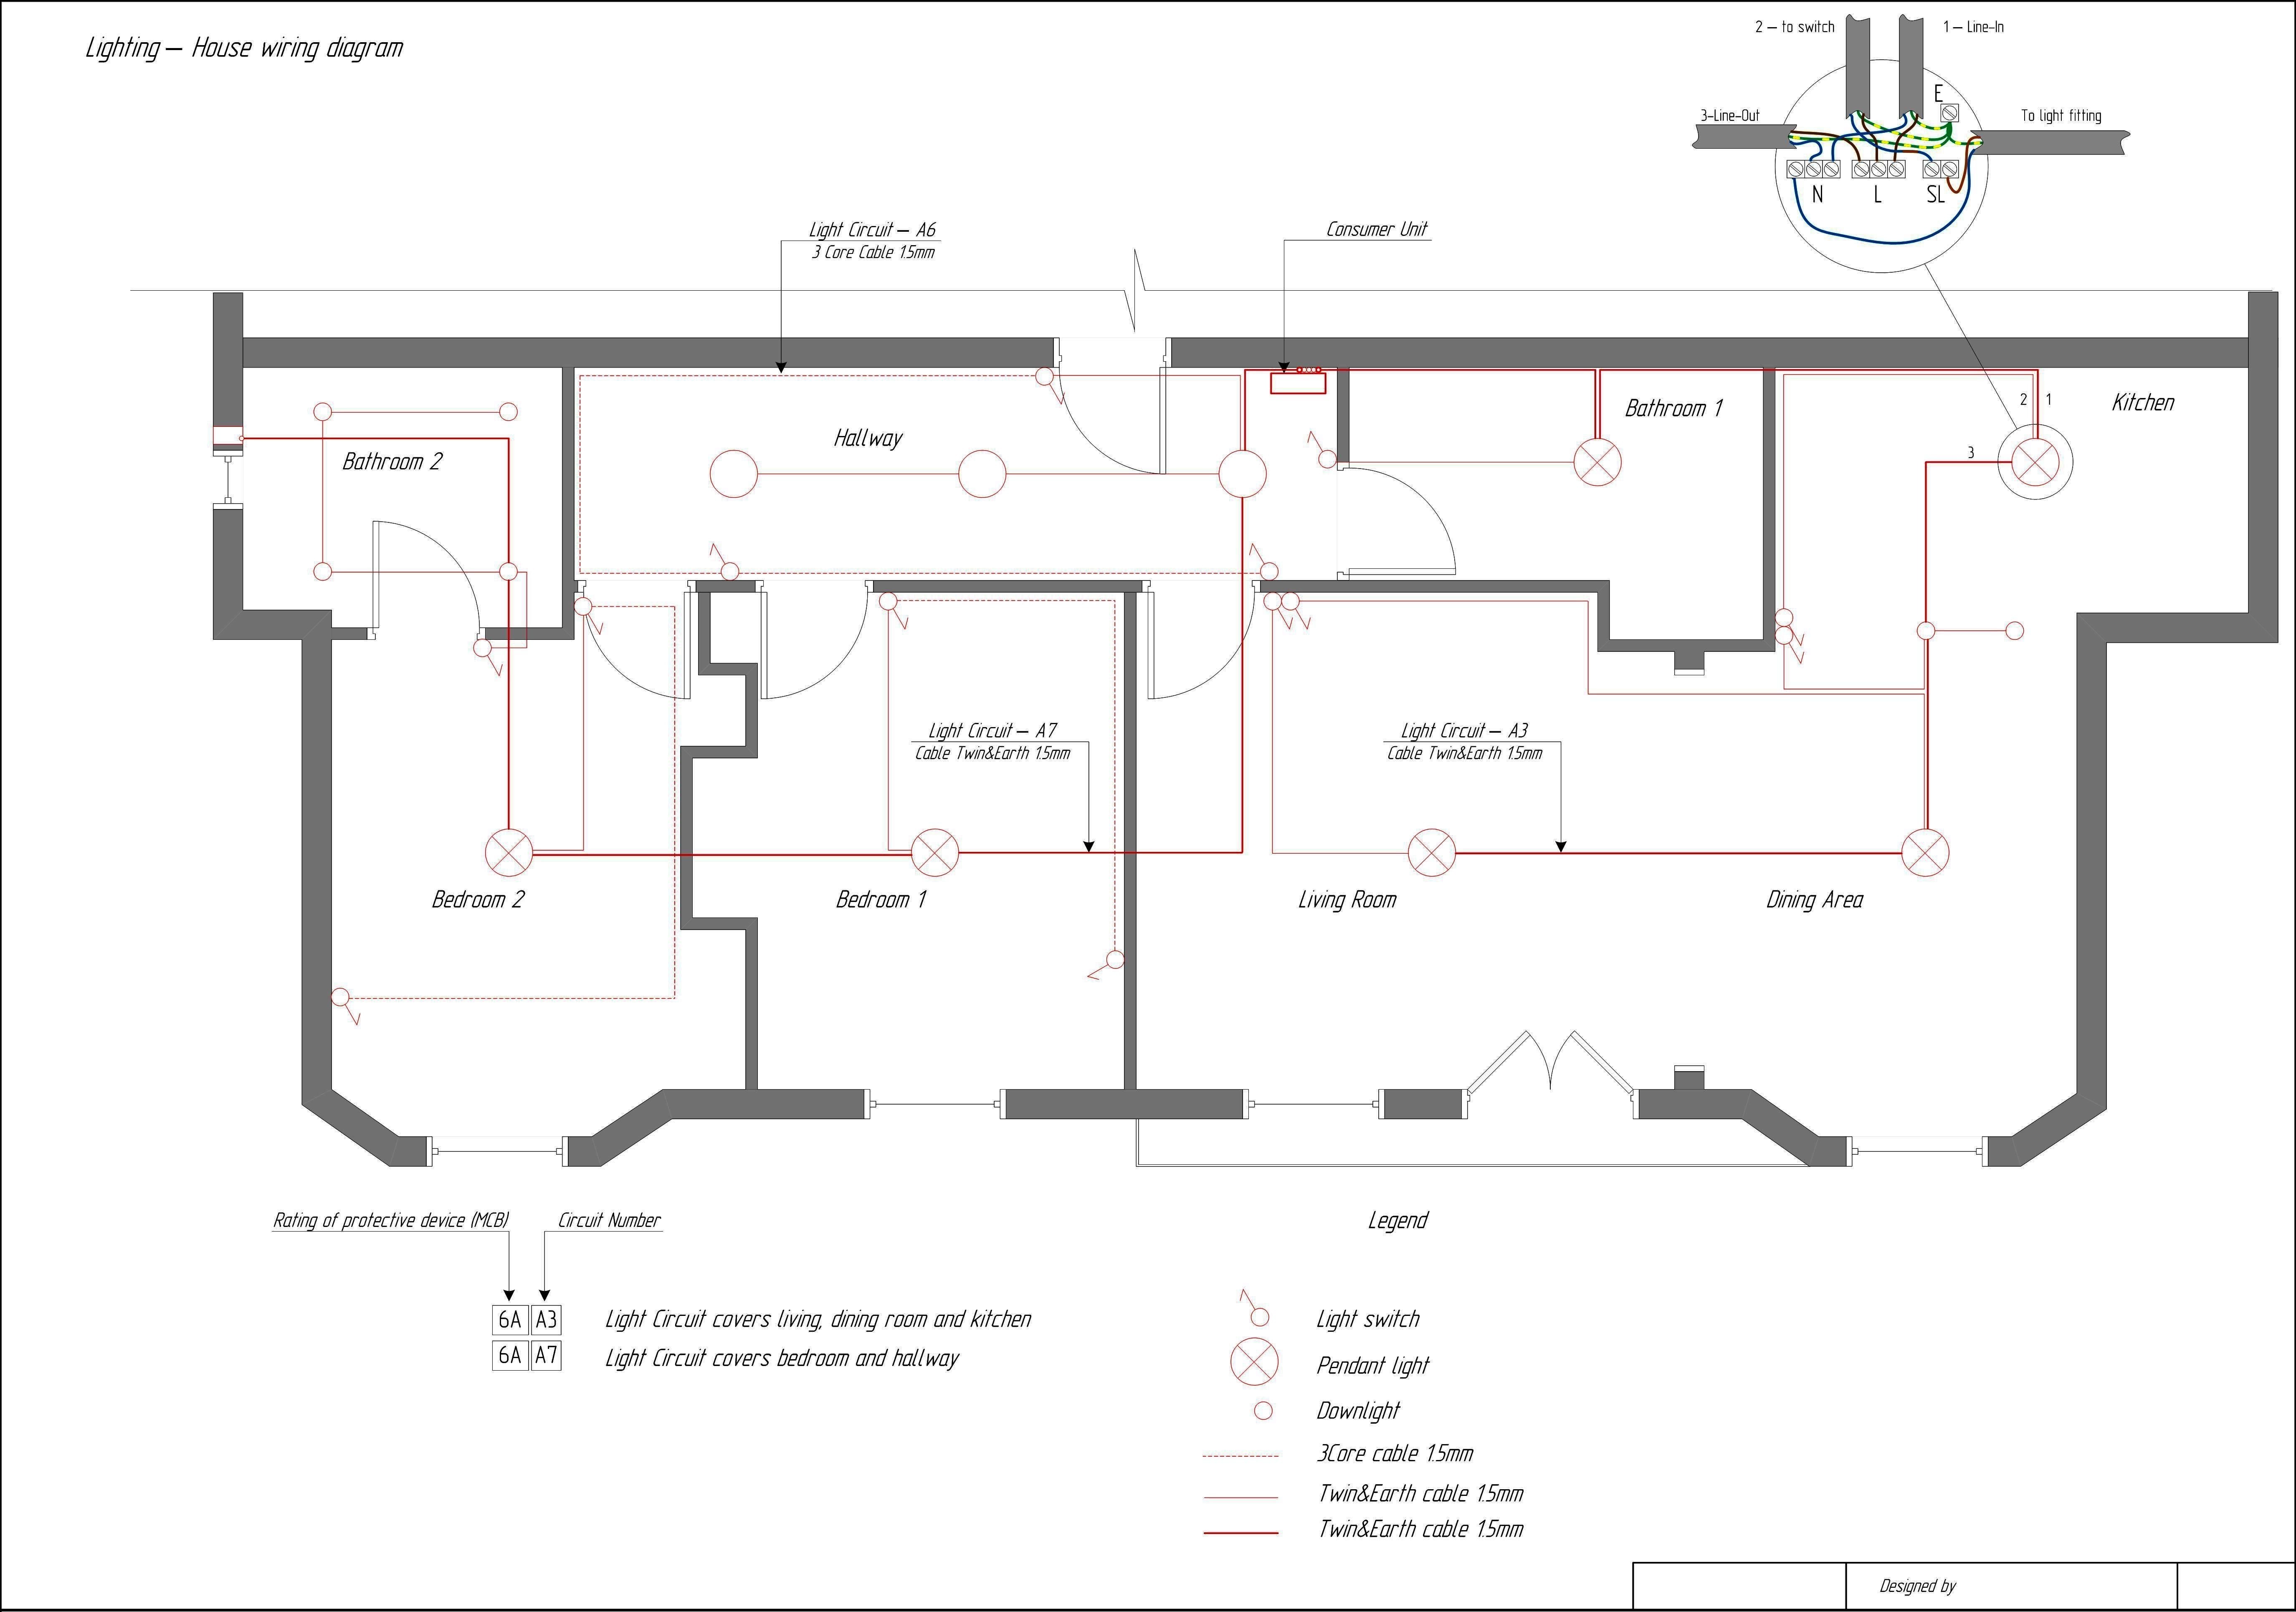 Electrical Wiring Diagram House Unique House Wiring Diagram Electrical Floor Plan 2004 2010 Bmw X3 E83 3 0d